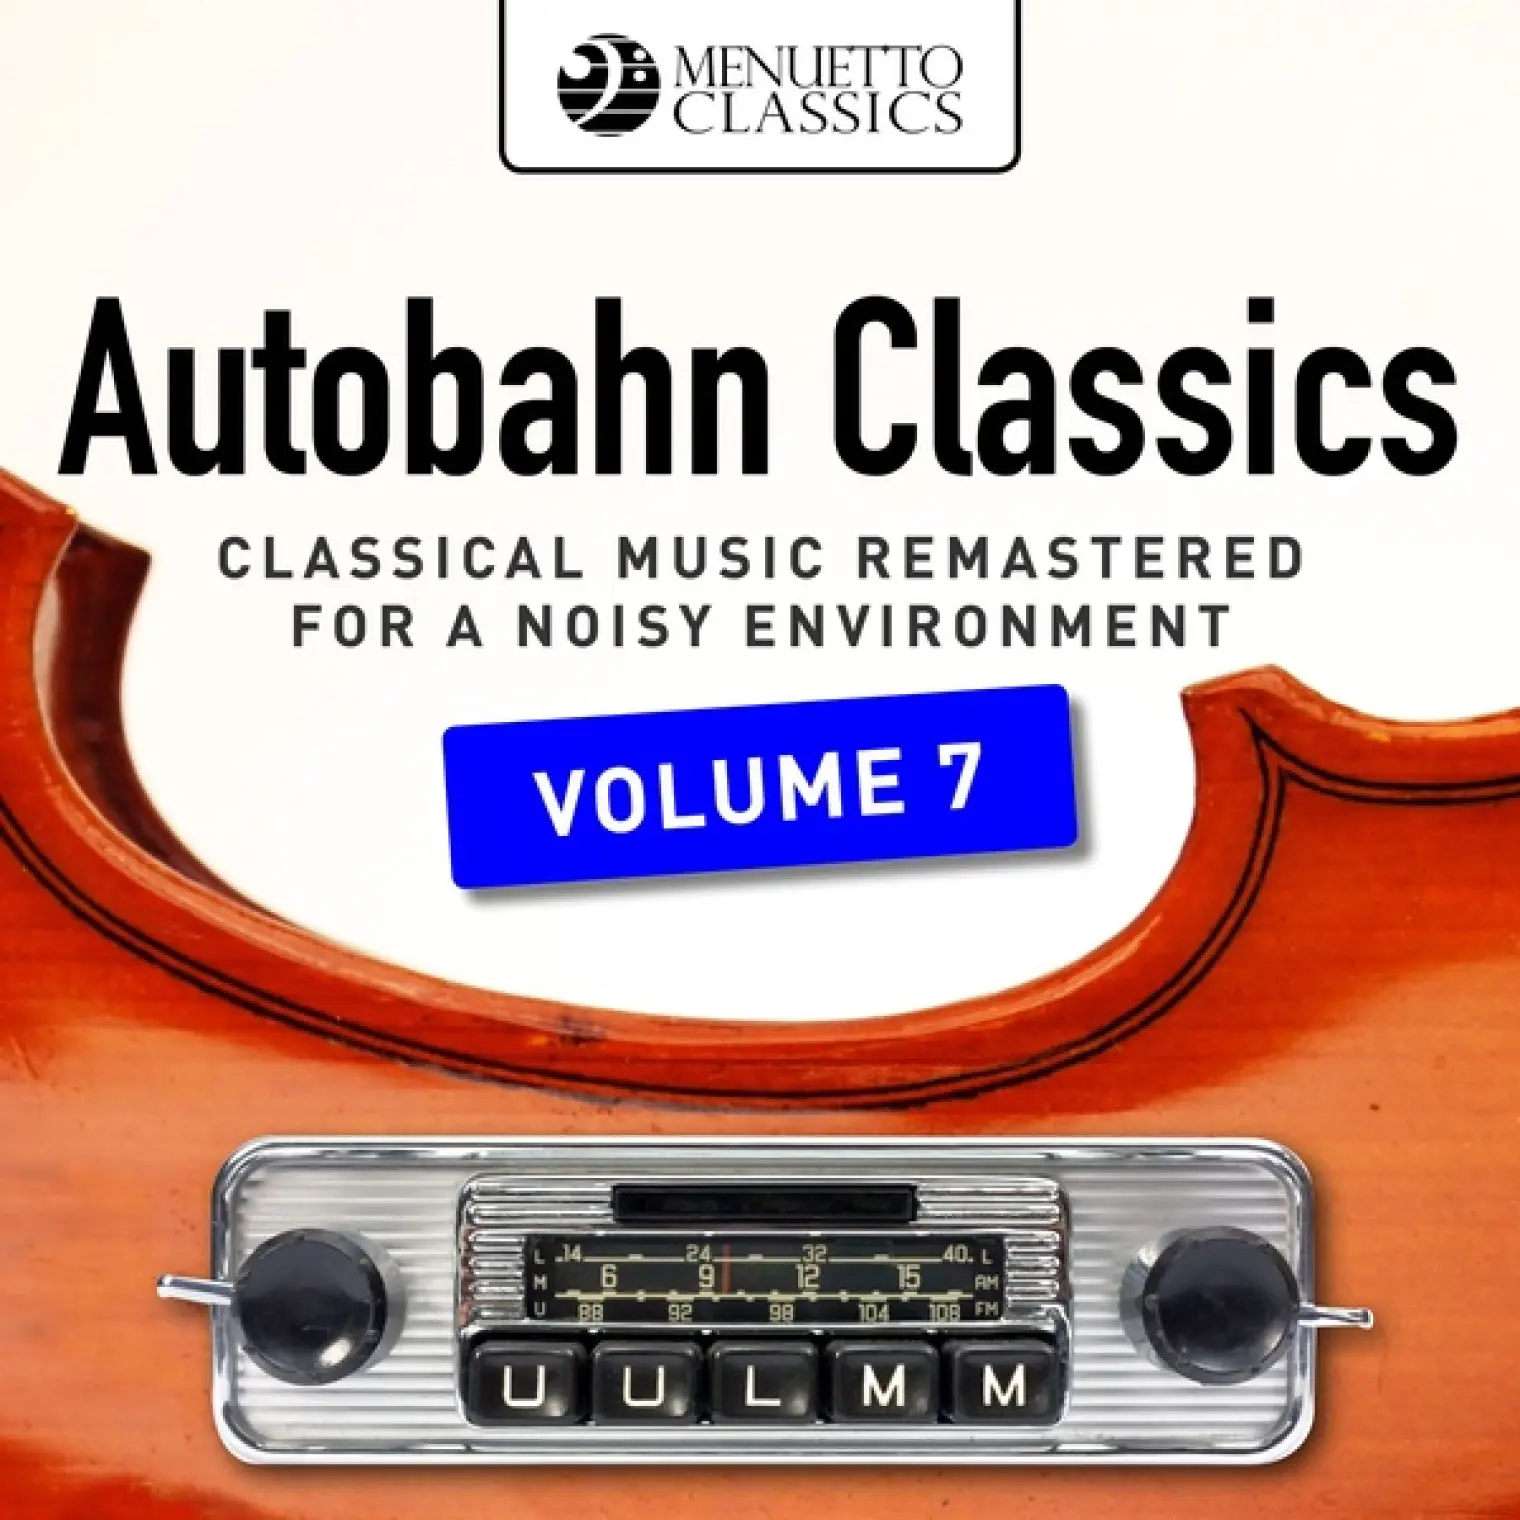 Autobahn Classics, Vol. 7 (Classical Music Remastered for a Noisy Environment) -  Various Artists 